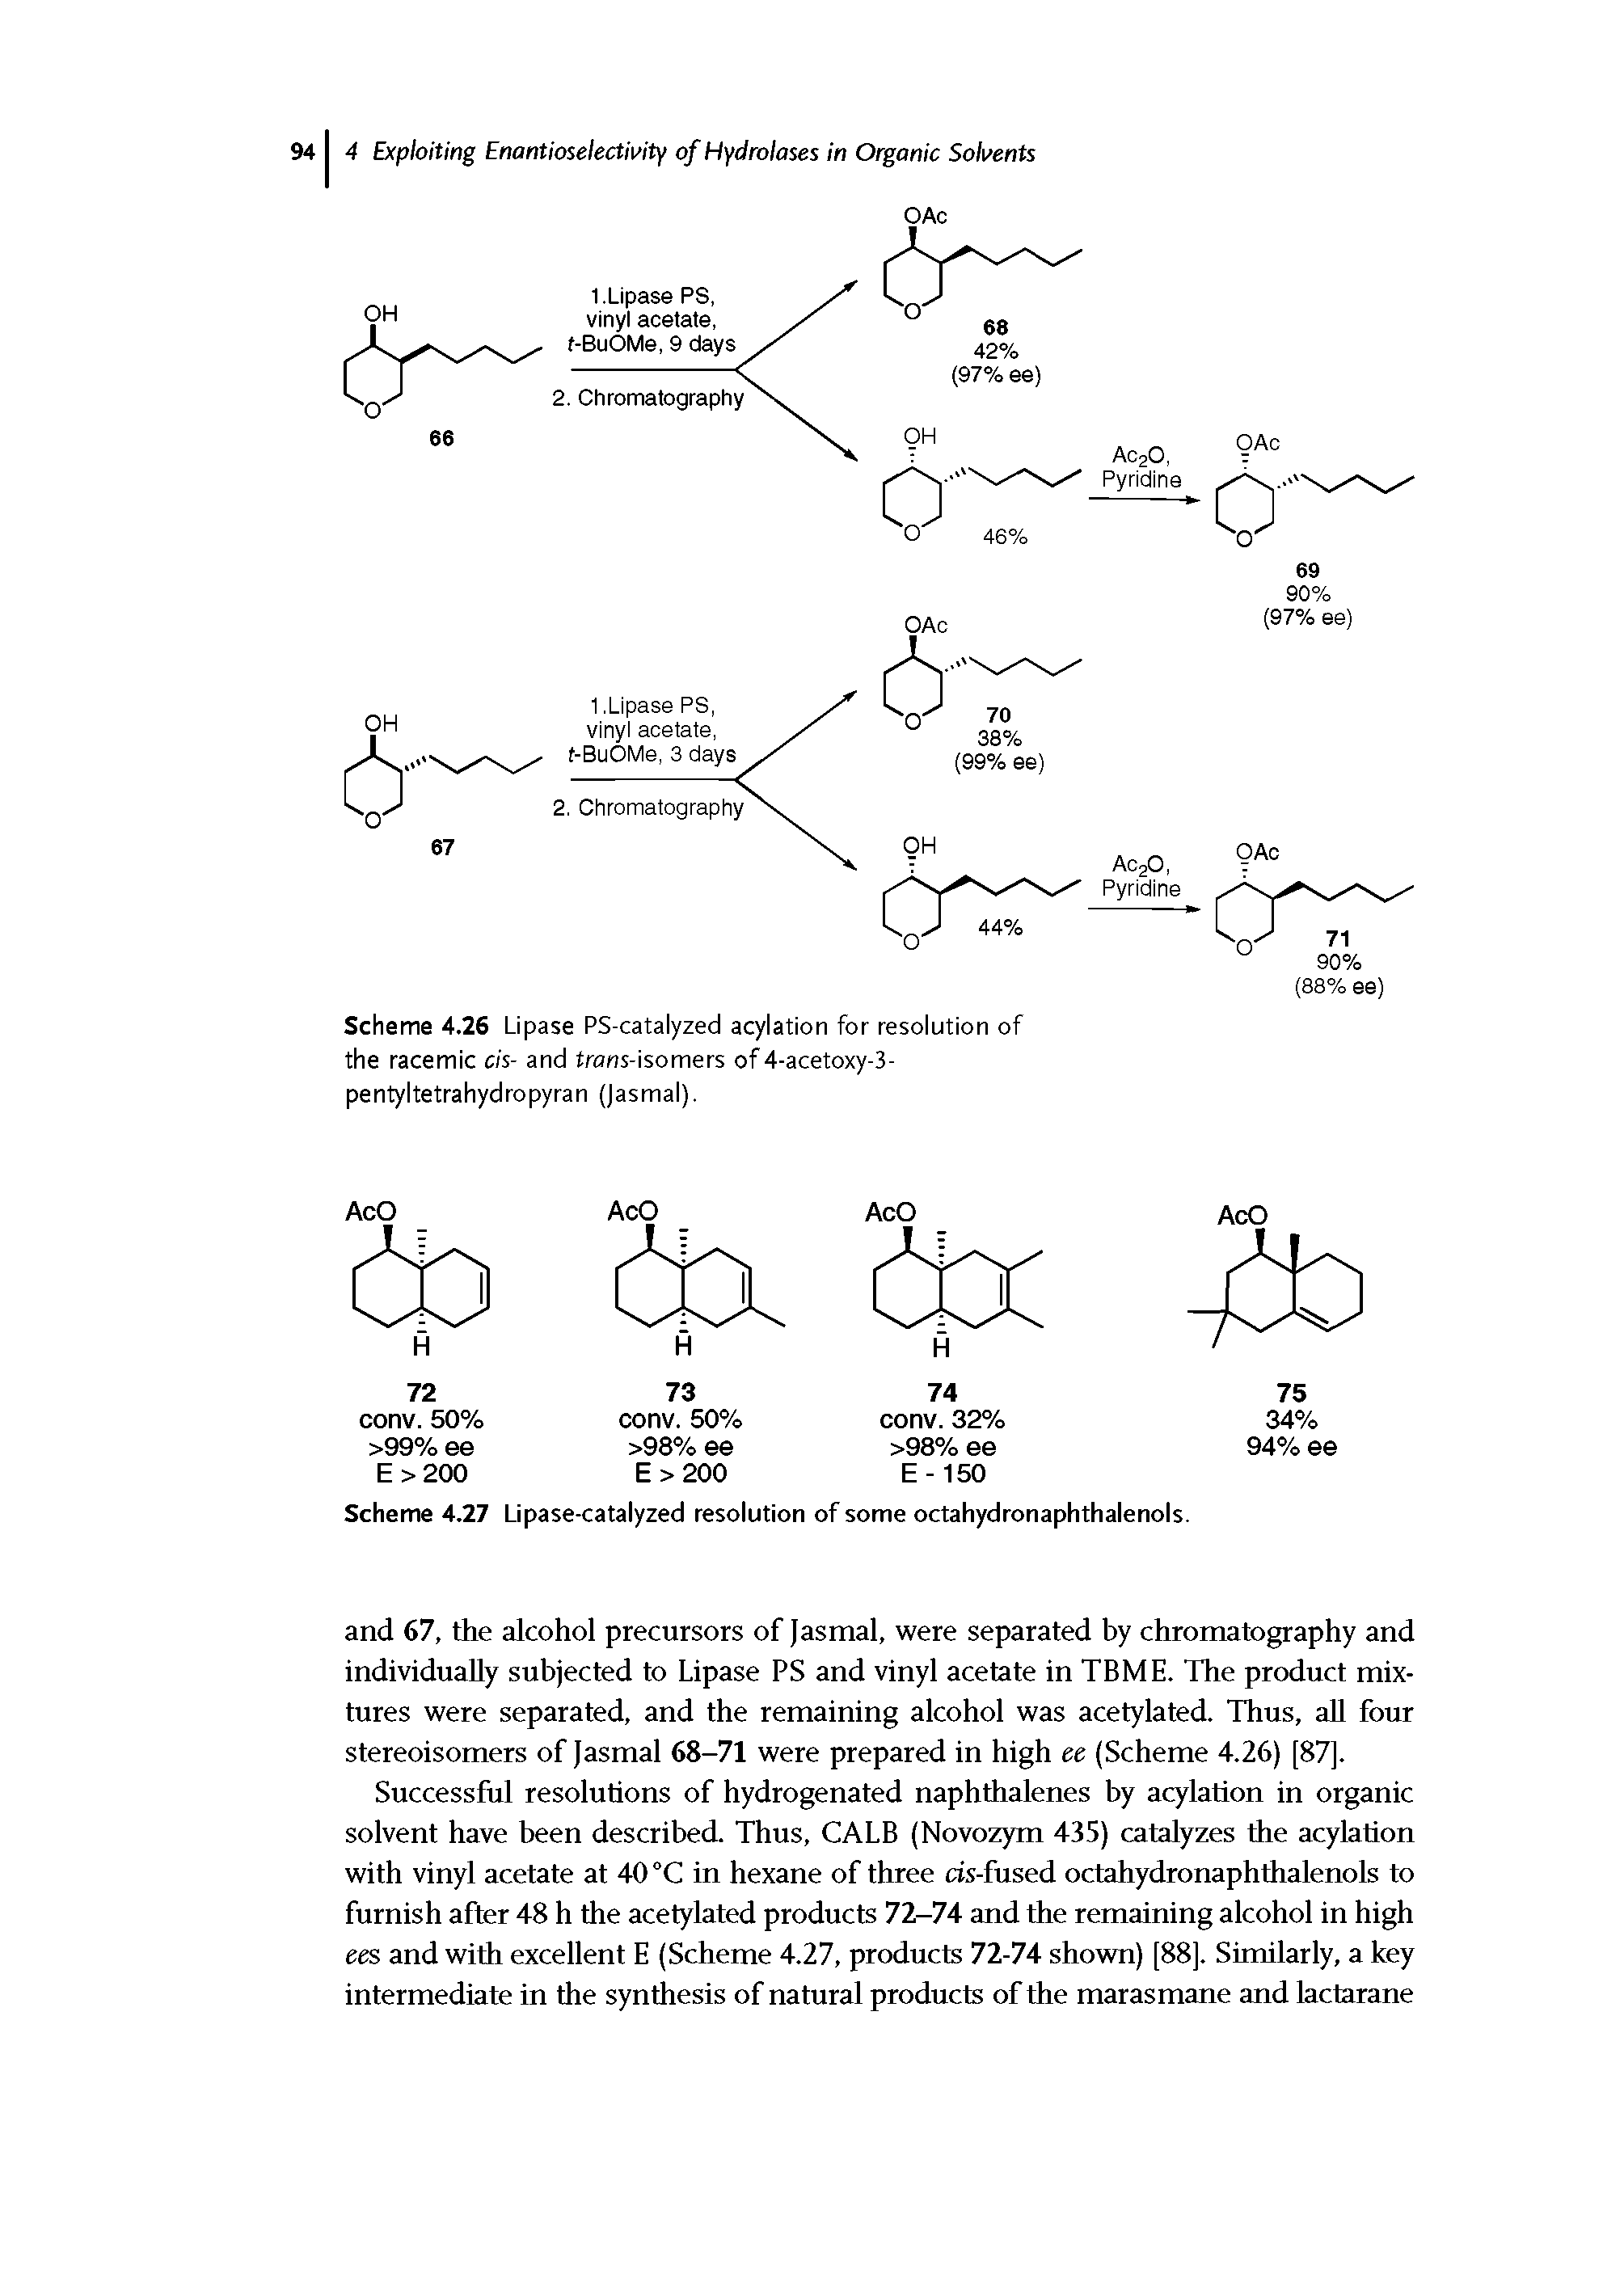 Scheme 4.26 Lipase PS-catalyzed acylation for resolution of the racemic cis- and frans-isomers of 4-acetoxy-3-pentyltetrahydropyran (Jasmal).